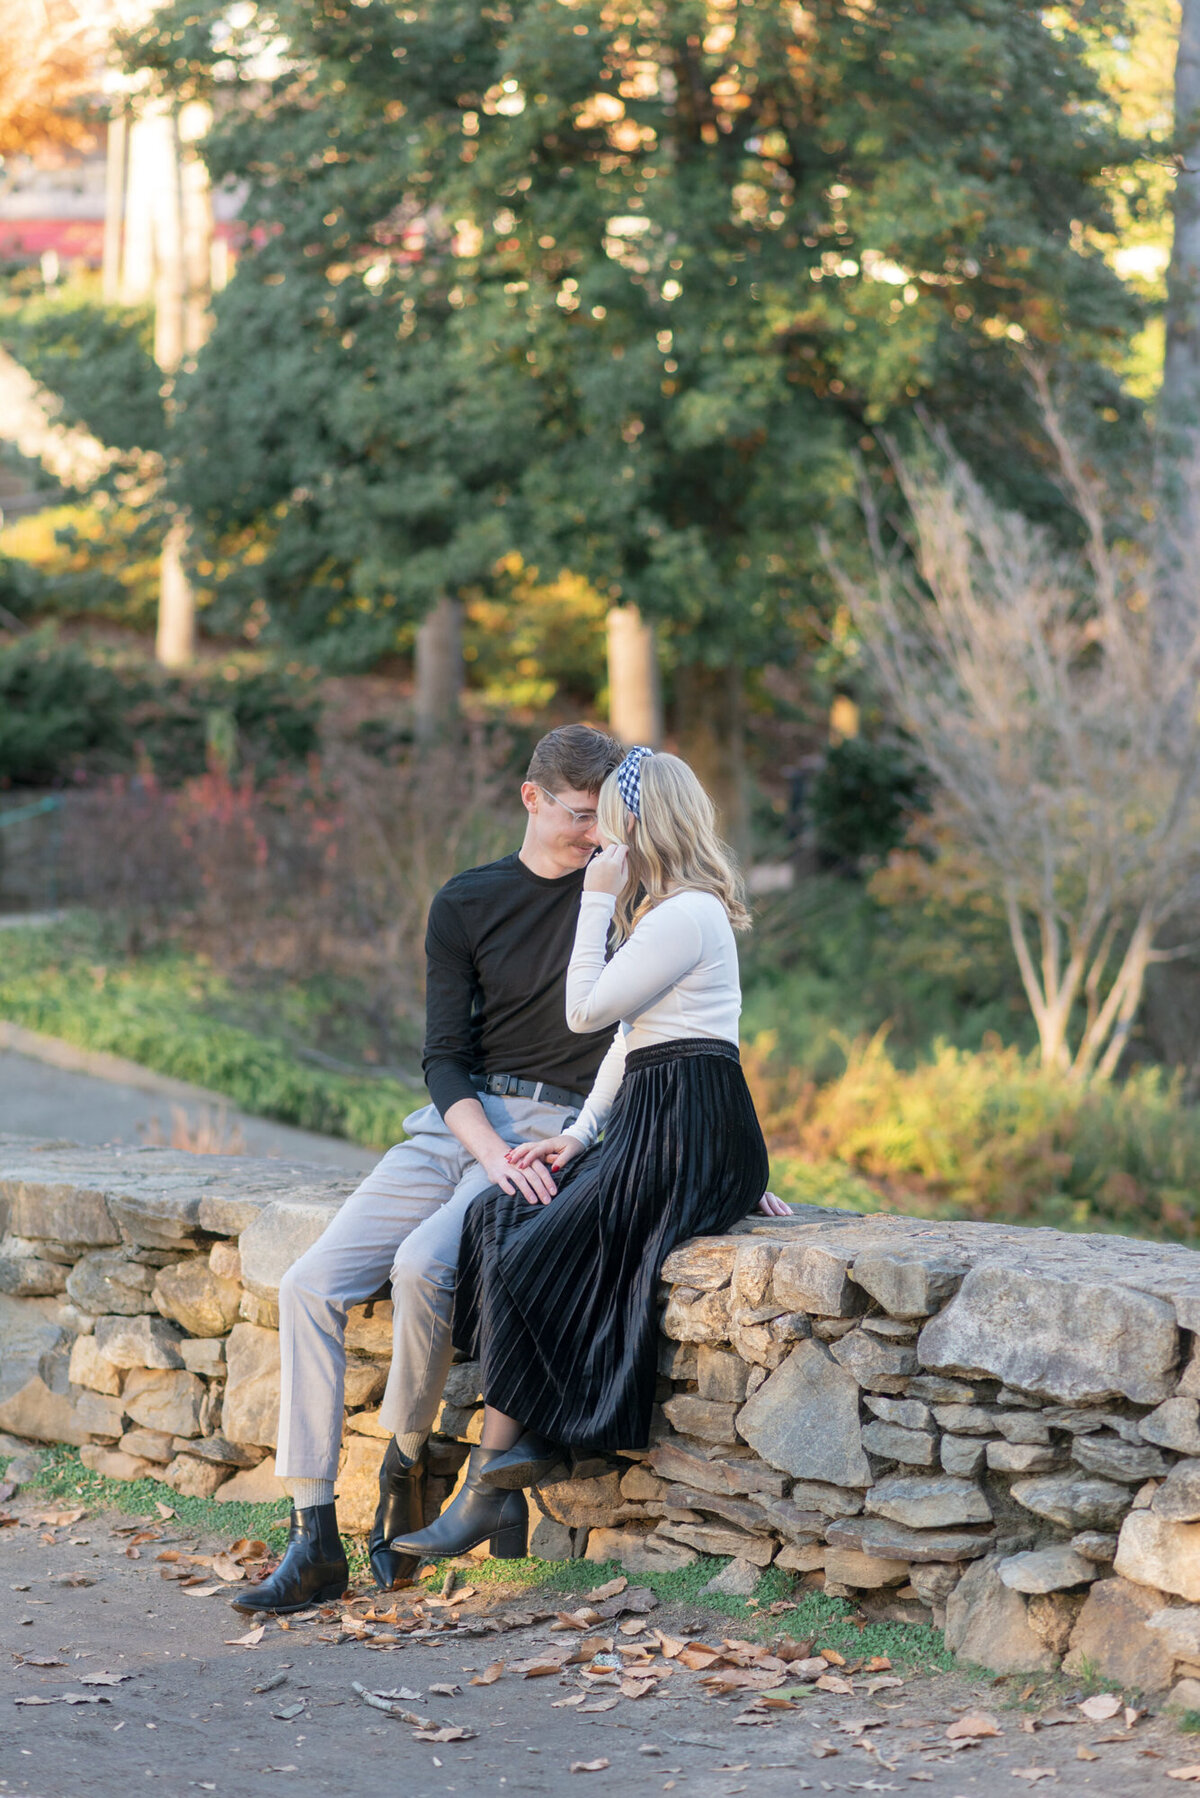 Fall Park engagement pictures in Greenville South Carolina best places to take an engagement photo in Greenville